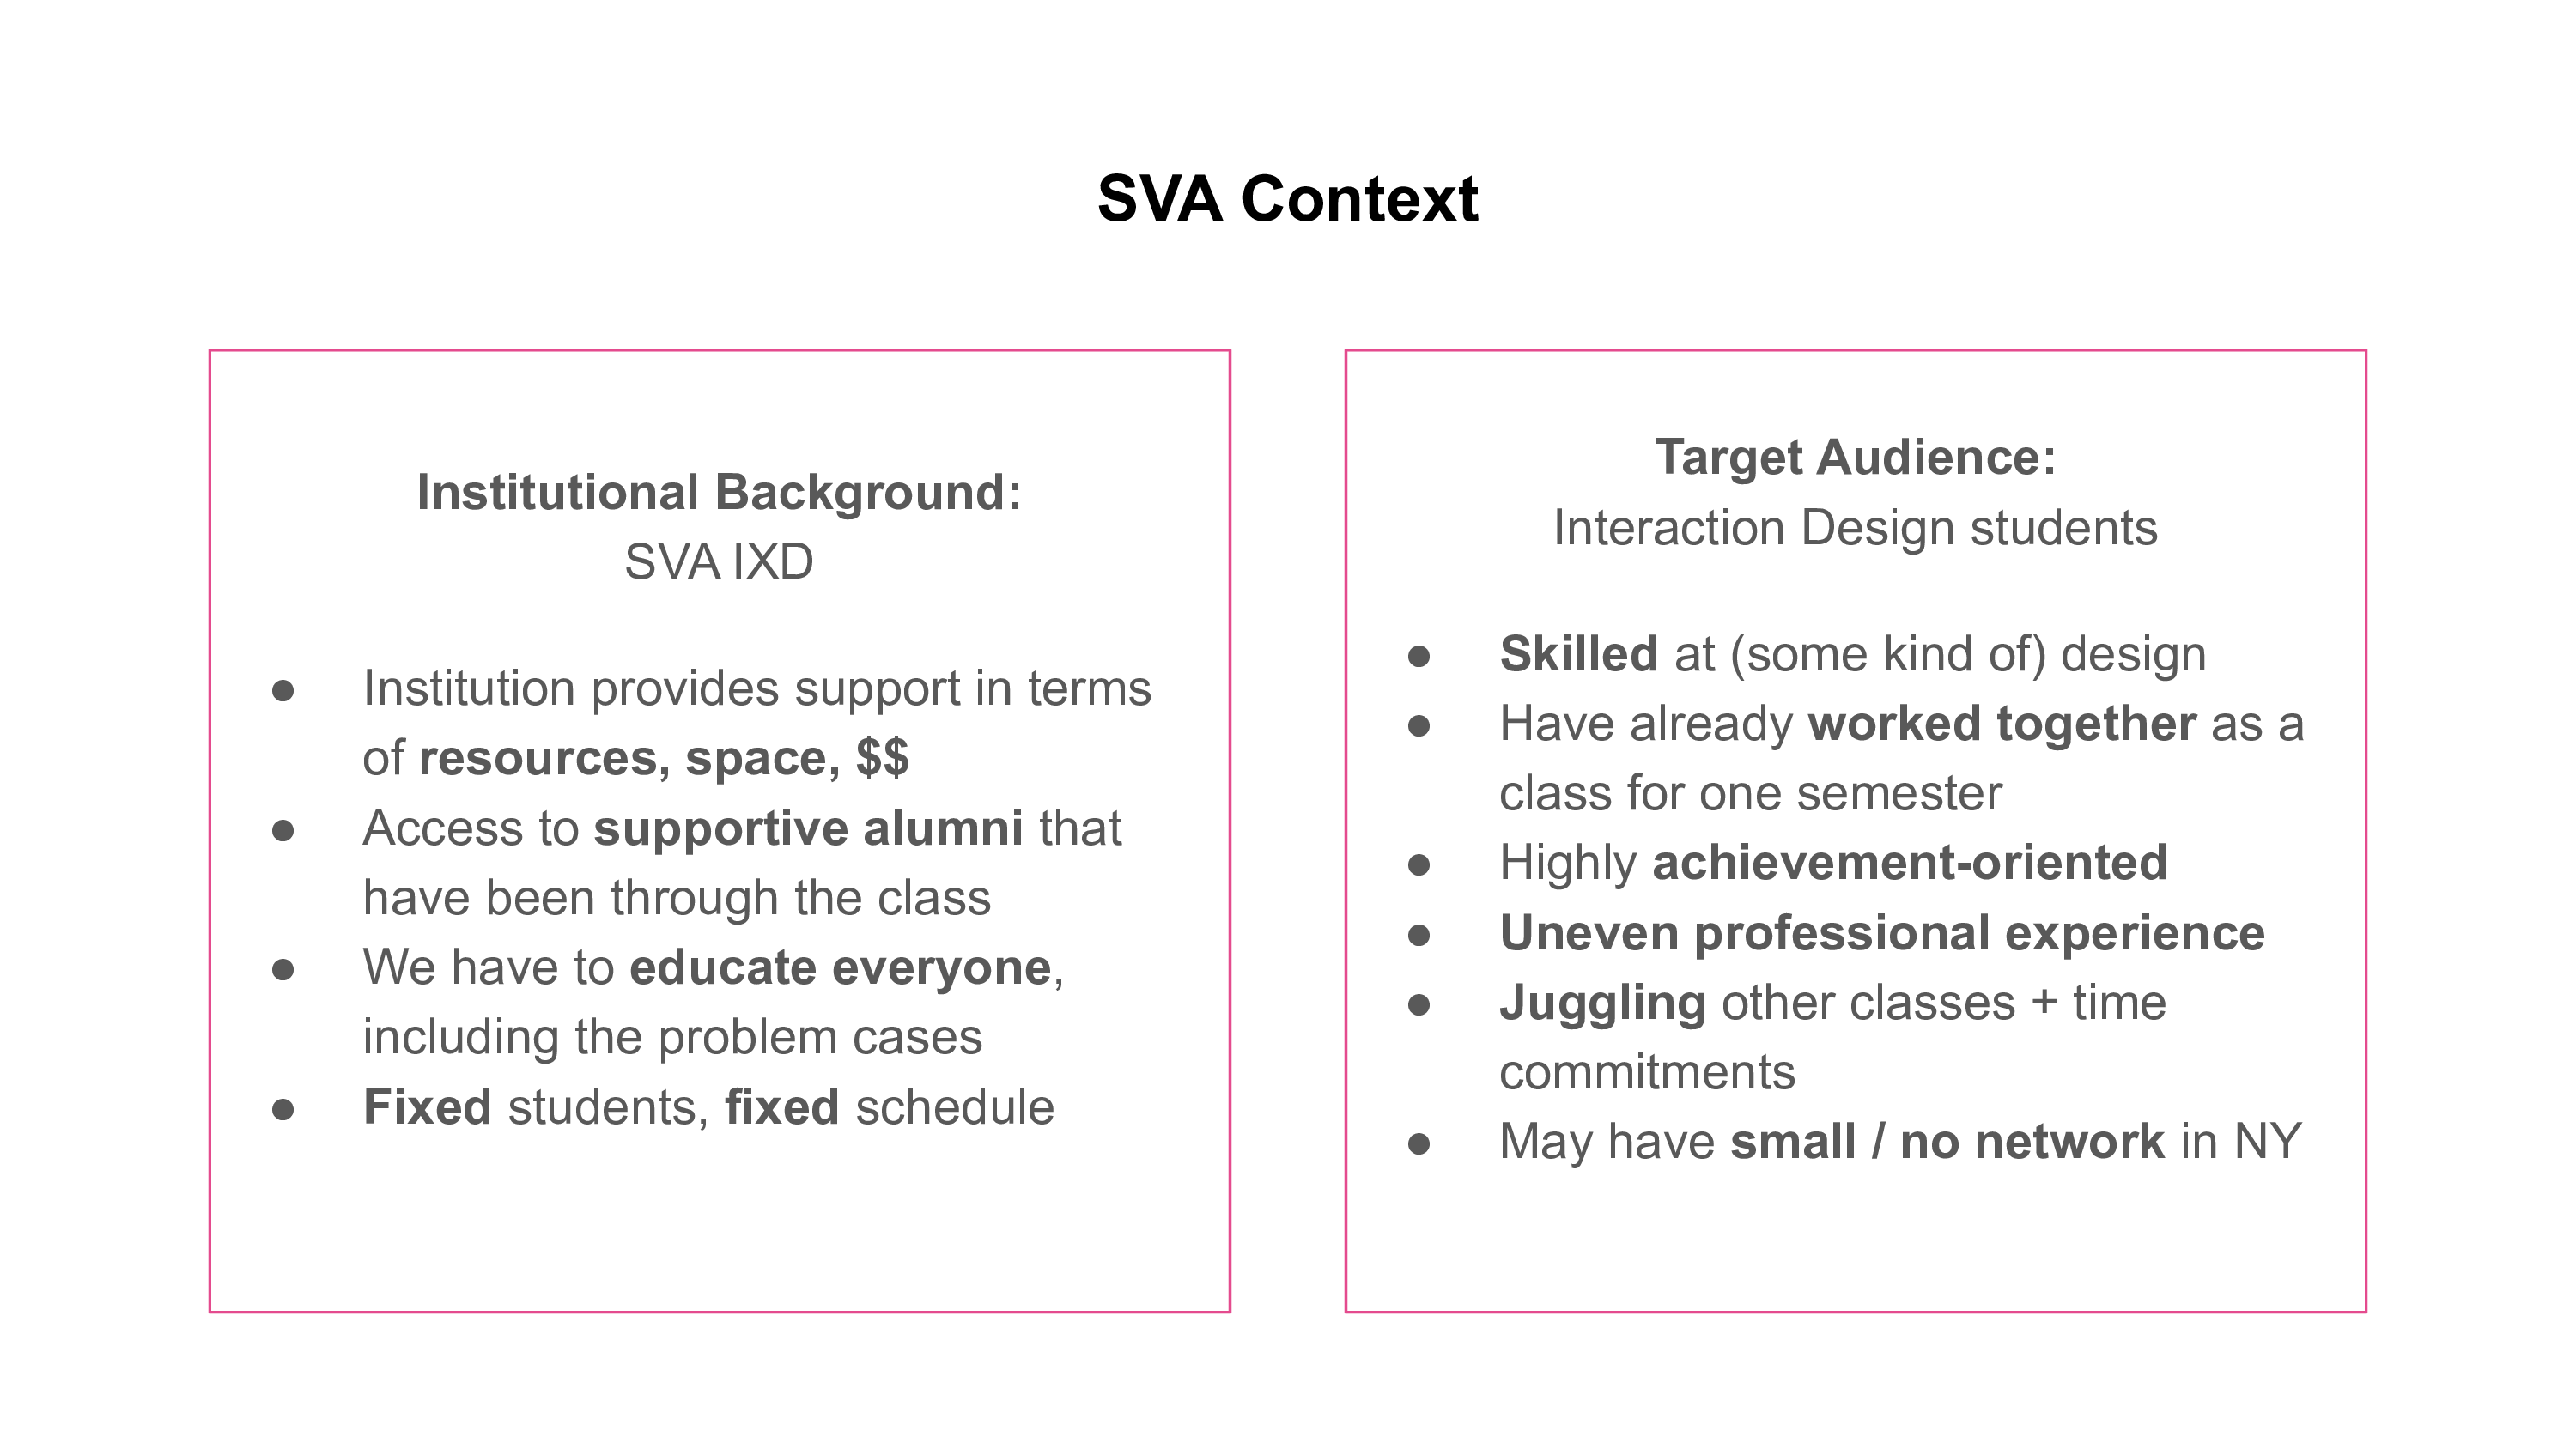 At SVA, we were working within an institution that provided resources, space, and access to supportive alumni; we also had a fixed group of students and a fixed schedule. The students are generally skilled at some kind of design, but tend to be highly achievement-oriented and are juggling other commitments. Many have small or no networks in New York.